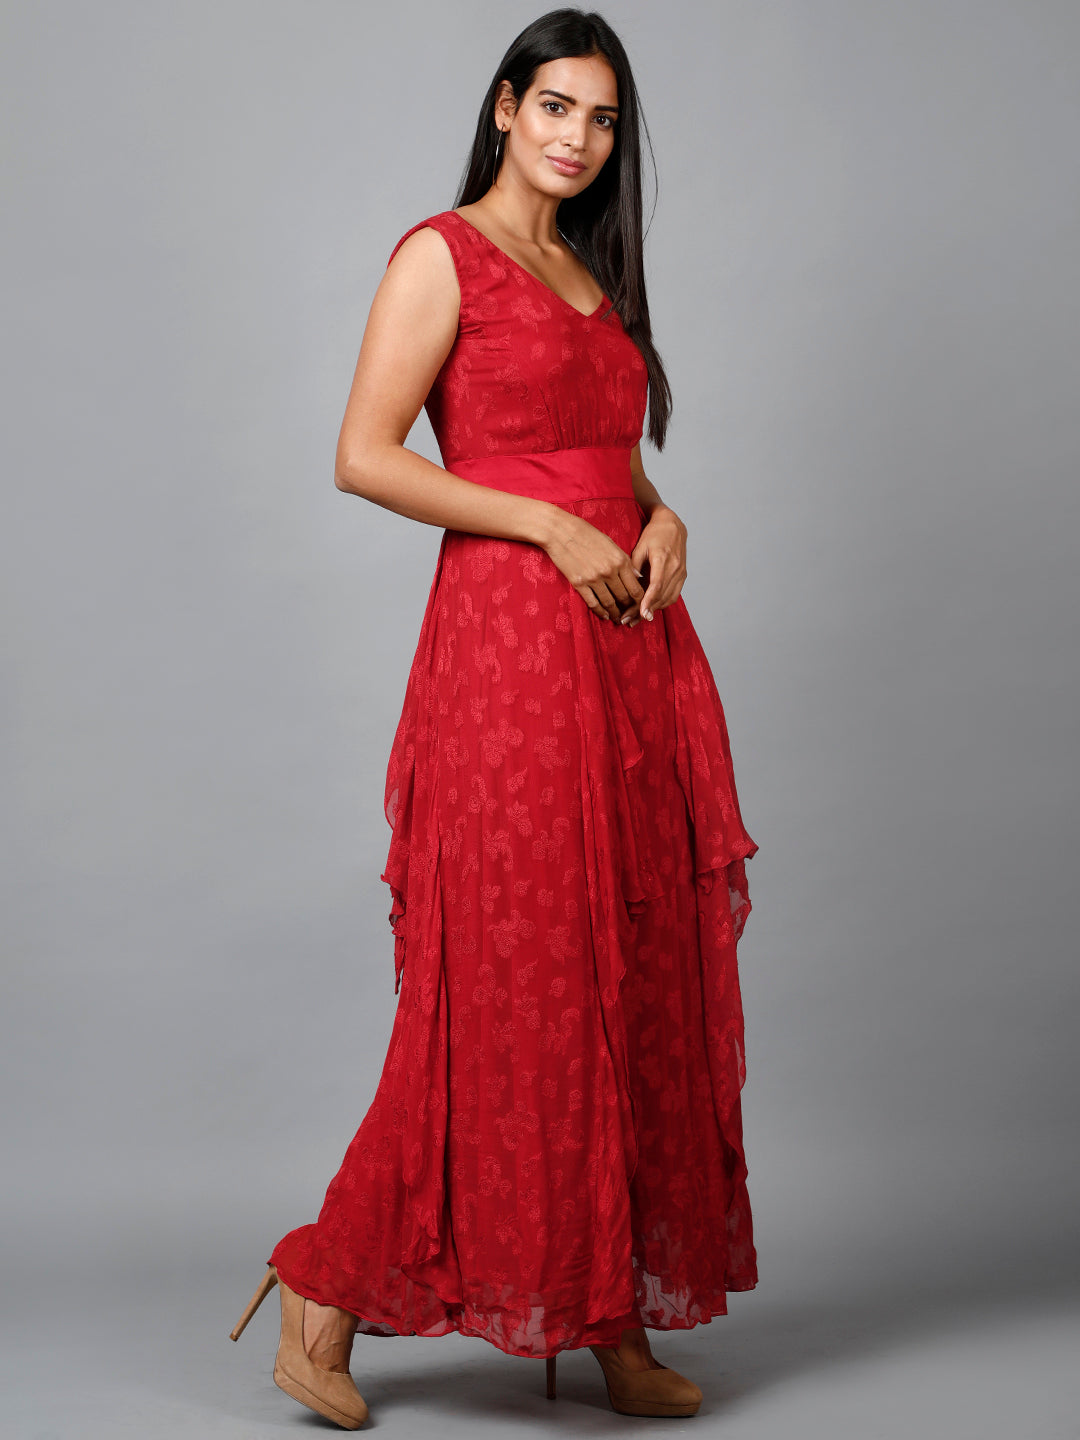 Women's Red Floral Self Design Georgette Dress - MIRACOLOS by Ruchi